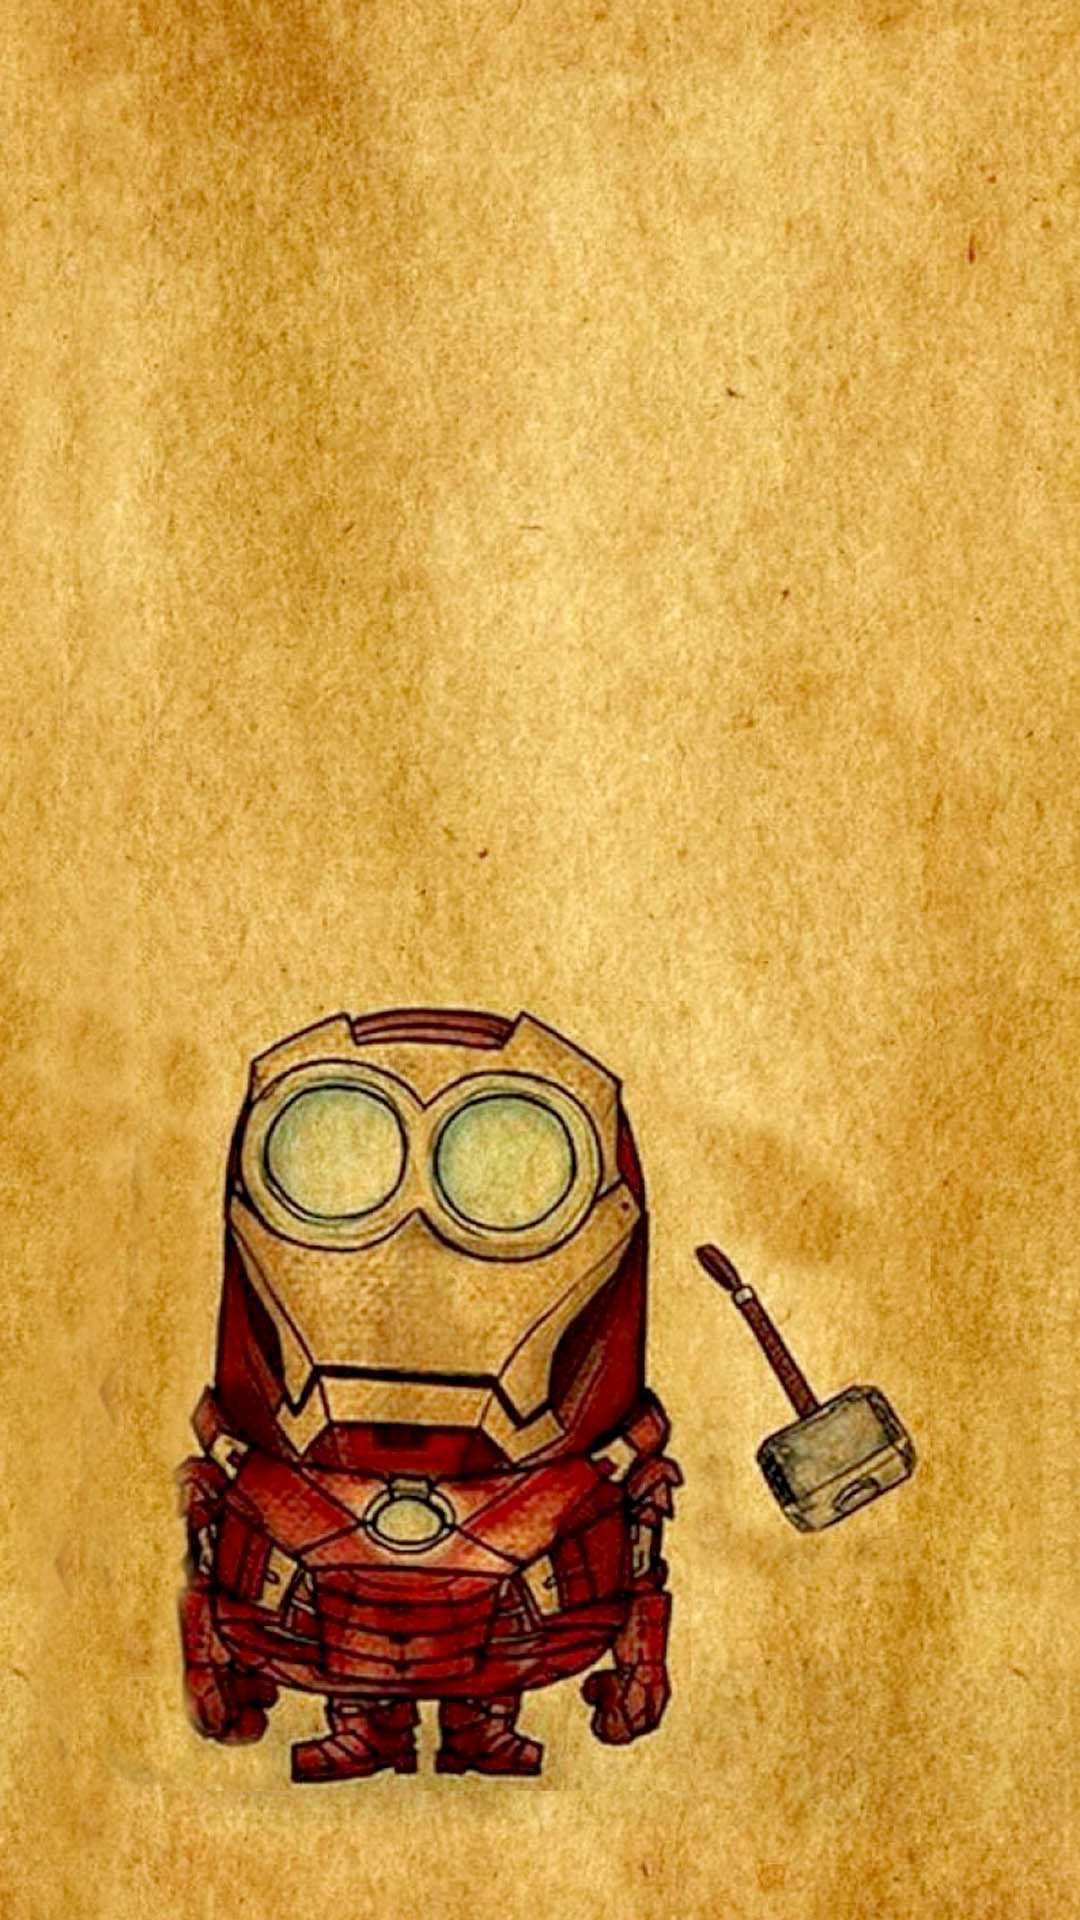 1080x1920 Red Avenger Minions